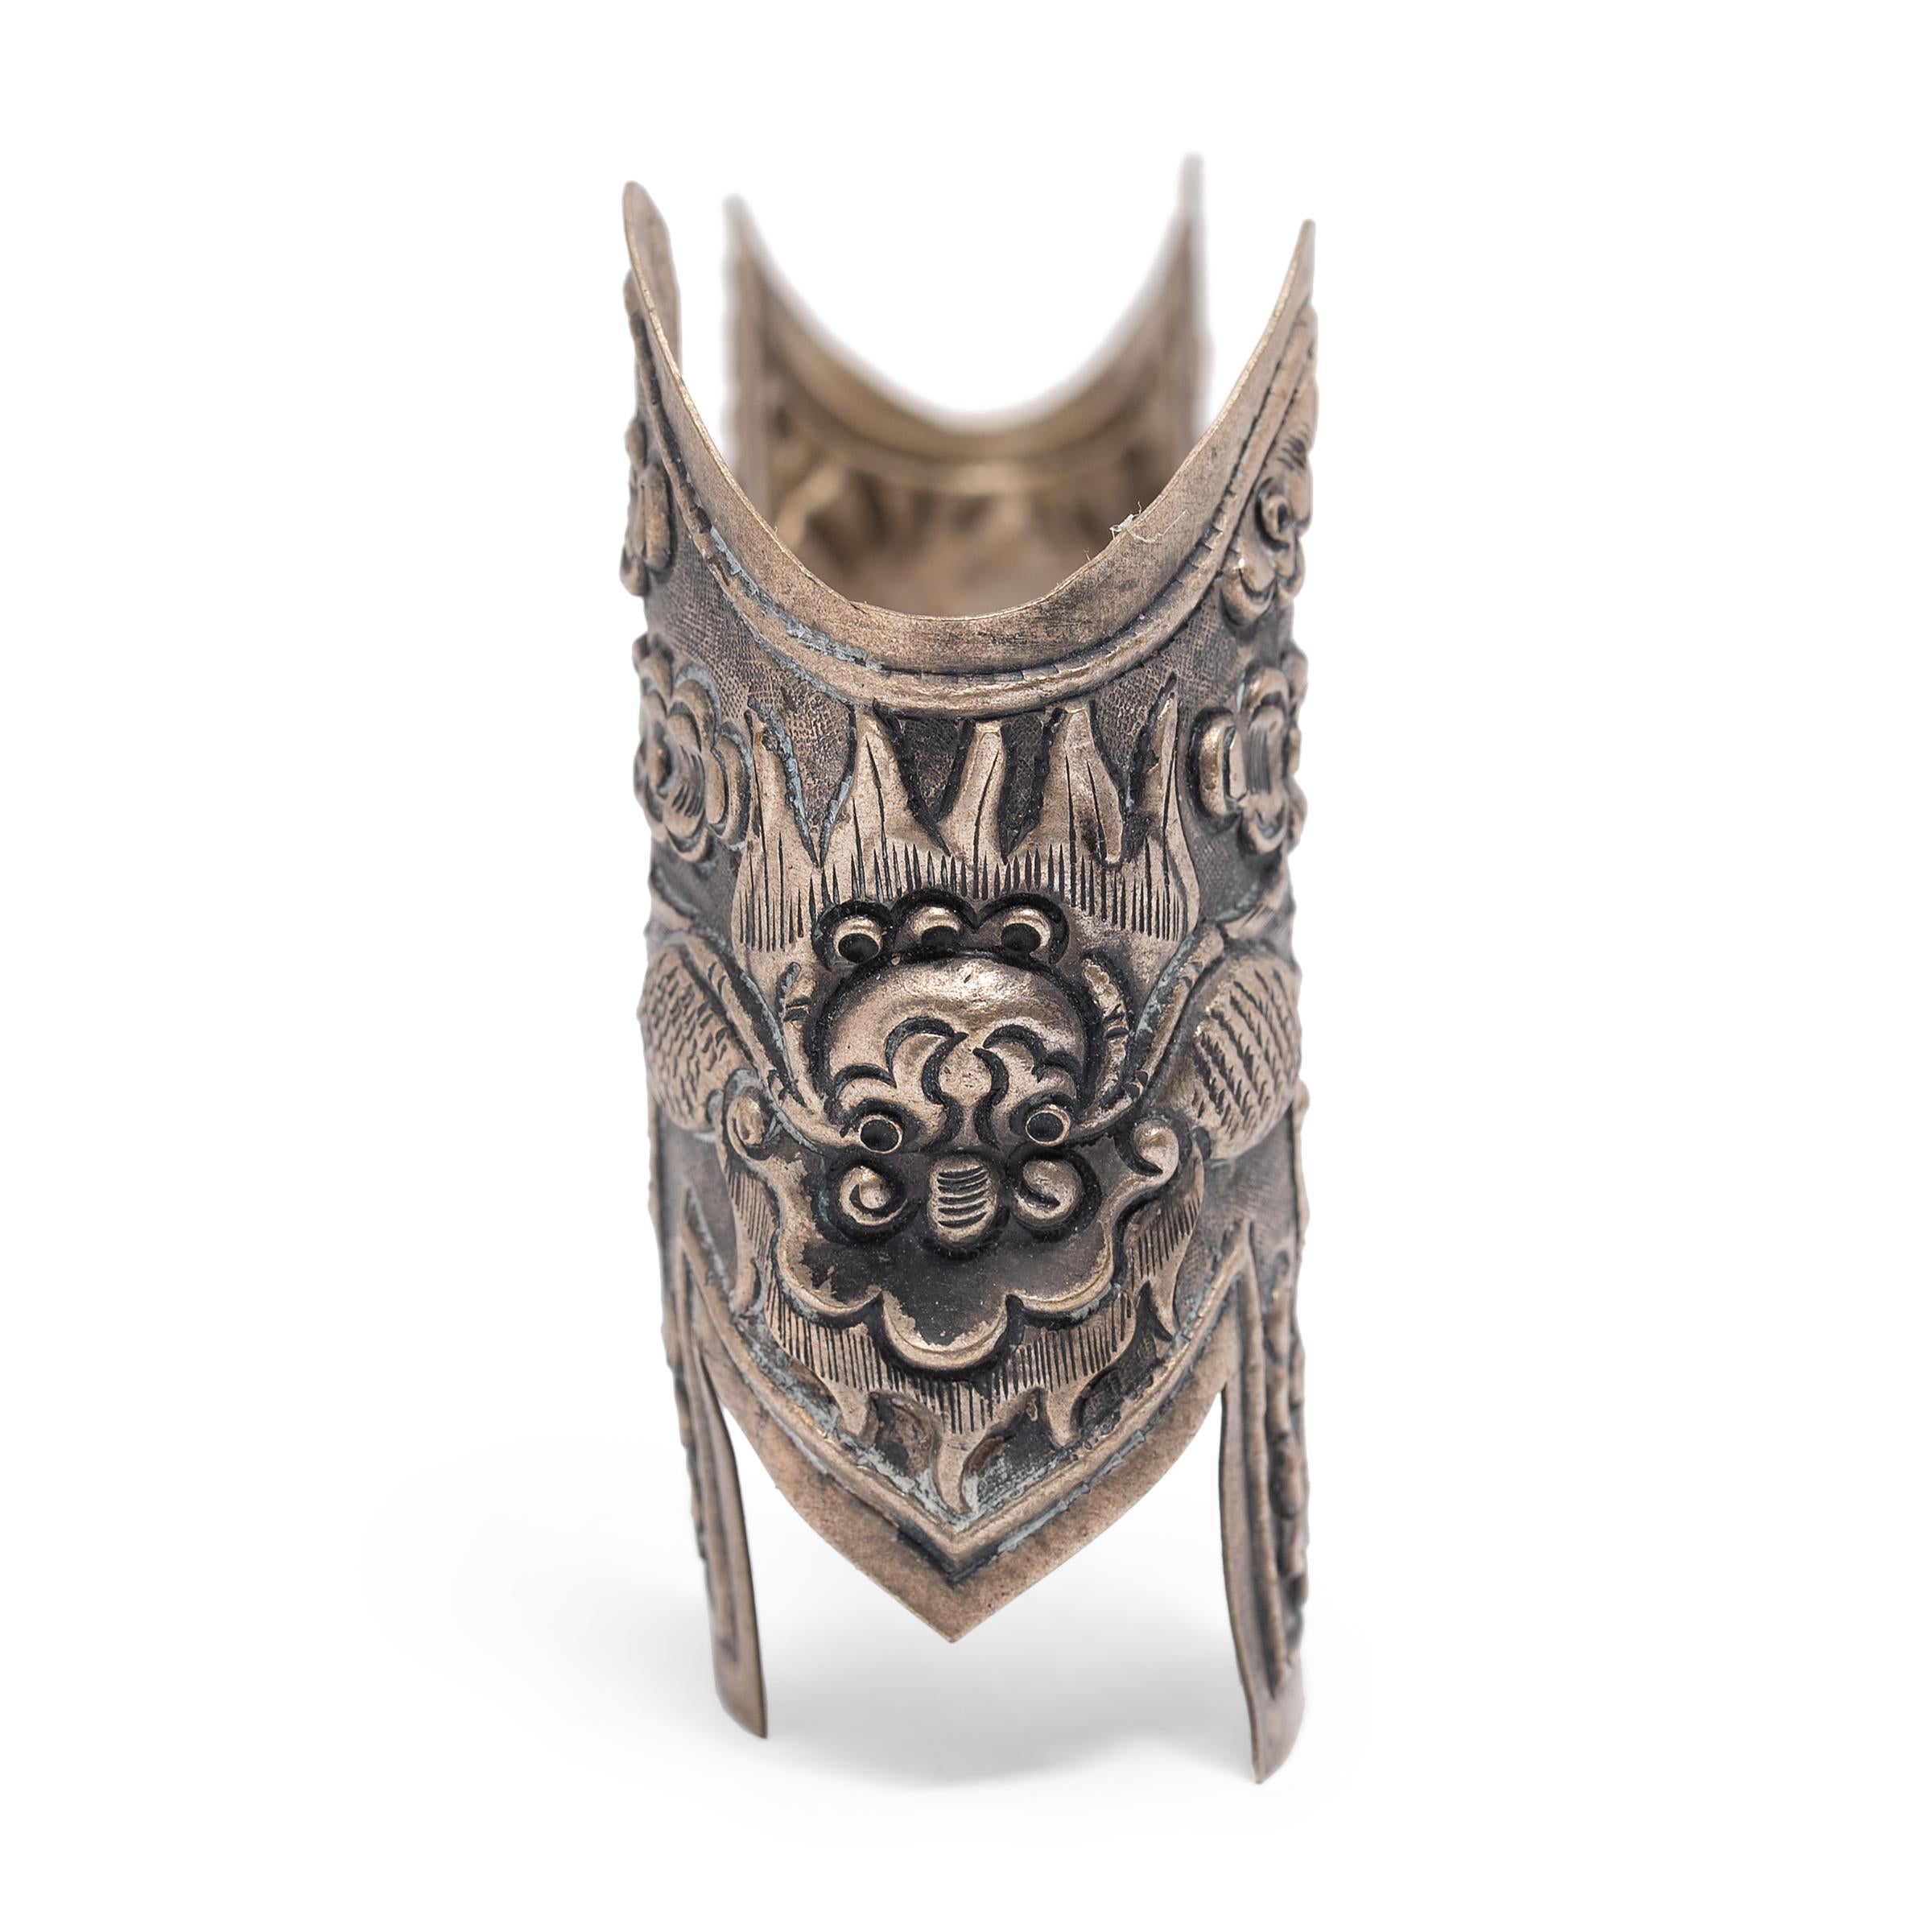 This unusual piece of silver hardware is wonderfully patterned with intricate Tibetan repoussé decoration. Comprised of two thin silver plates linked by a straight rod, the metal fitting is decorated on each side with a fearsome dragon, his feet in